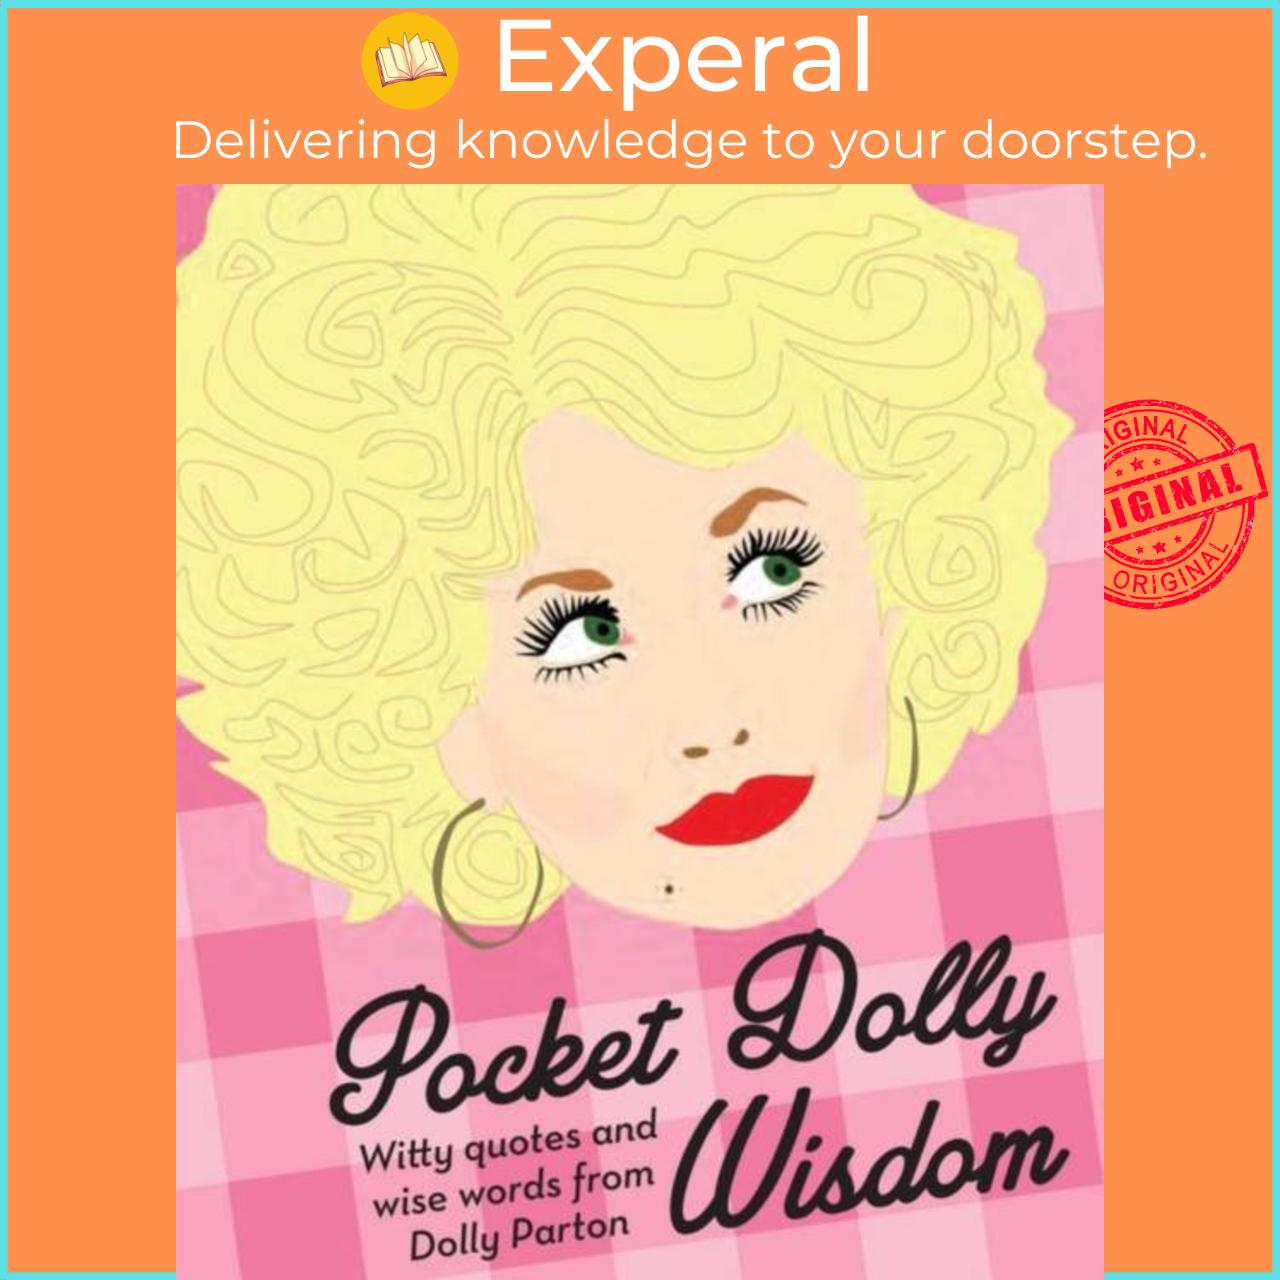 Sách - Pocket Dolly Wisdom - Witty Quotes and Wise Words From Dolly Parton by Hardie Grant Books (UK edition, hardcover)